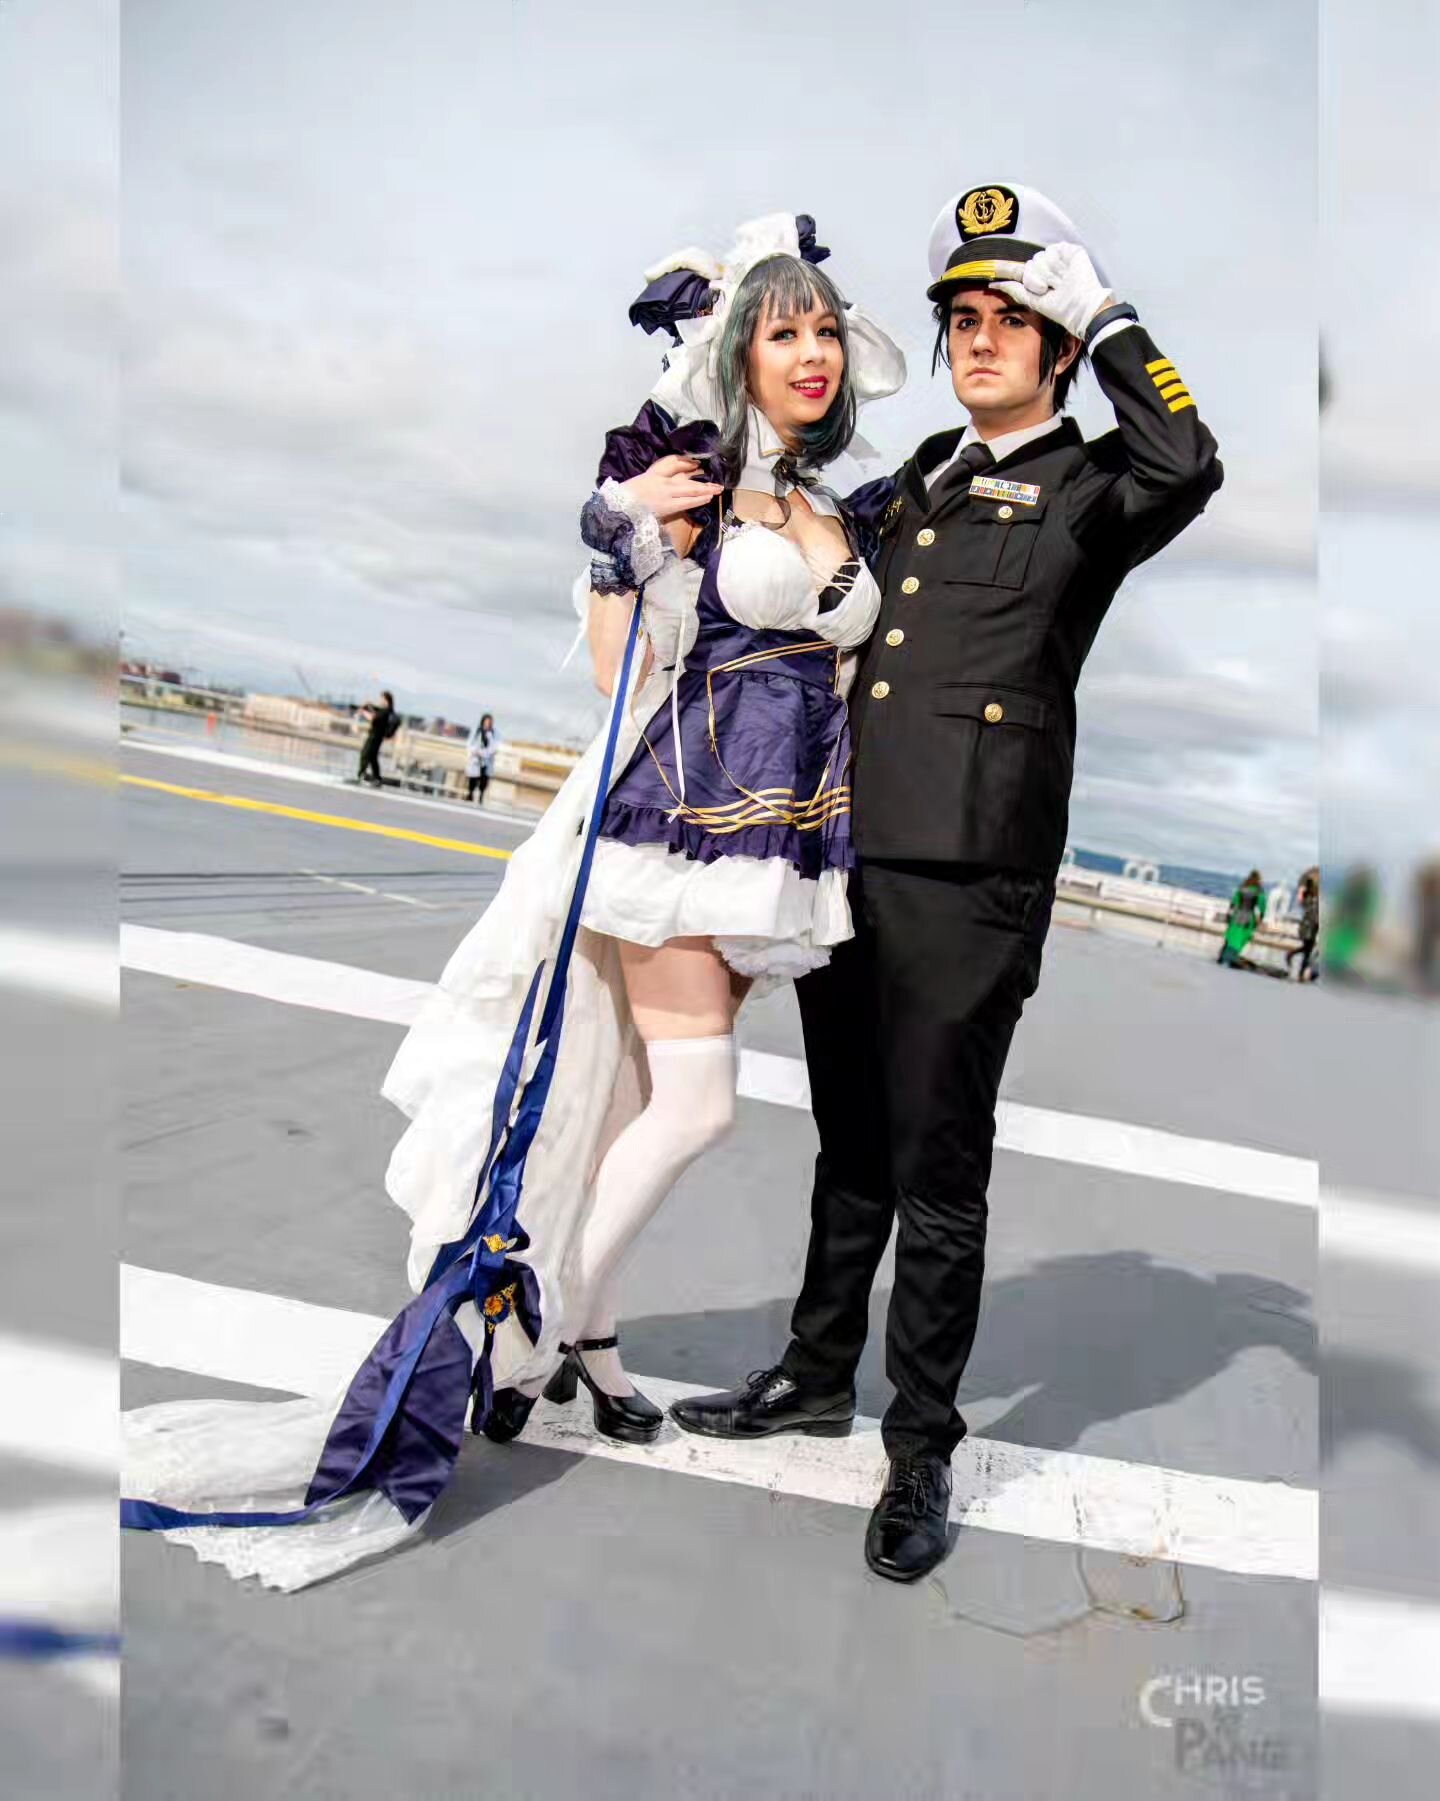 &quot;It's a dream to finally stand here with my admiral. Now come back here so I can cuddle you!&quot; ~Cheshire

#Admiral: @milesgvo 
#Cheshire: @baninabear

CarrierCon photos from the @usshornetmuseum are still in progress so hang tight.

#Carrier